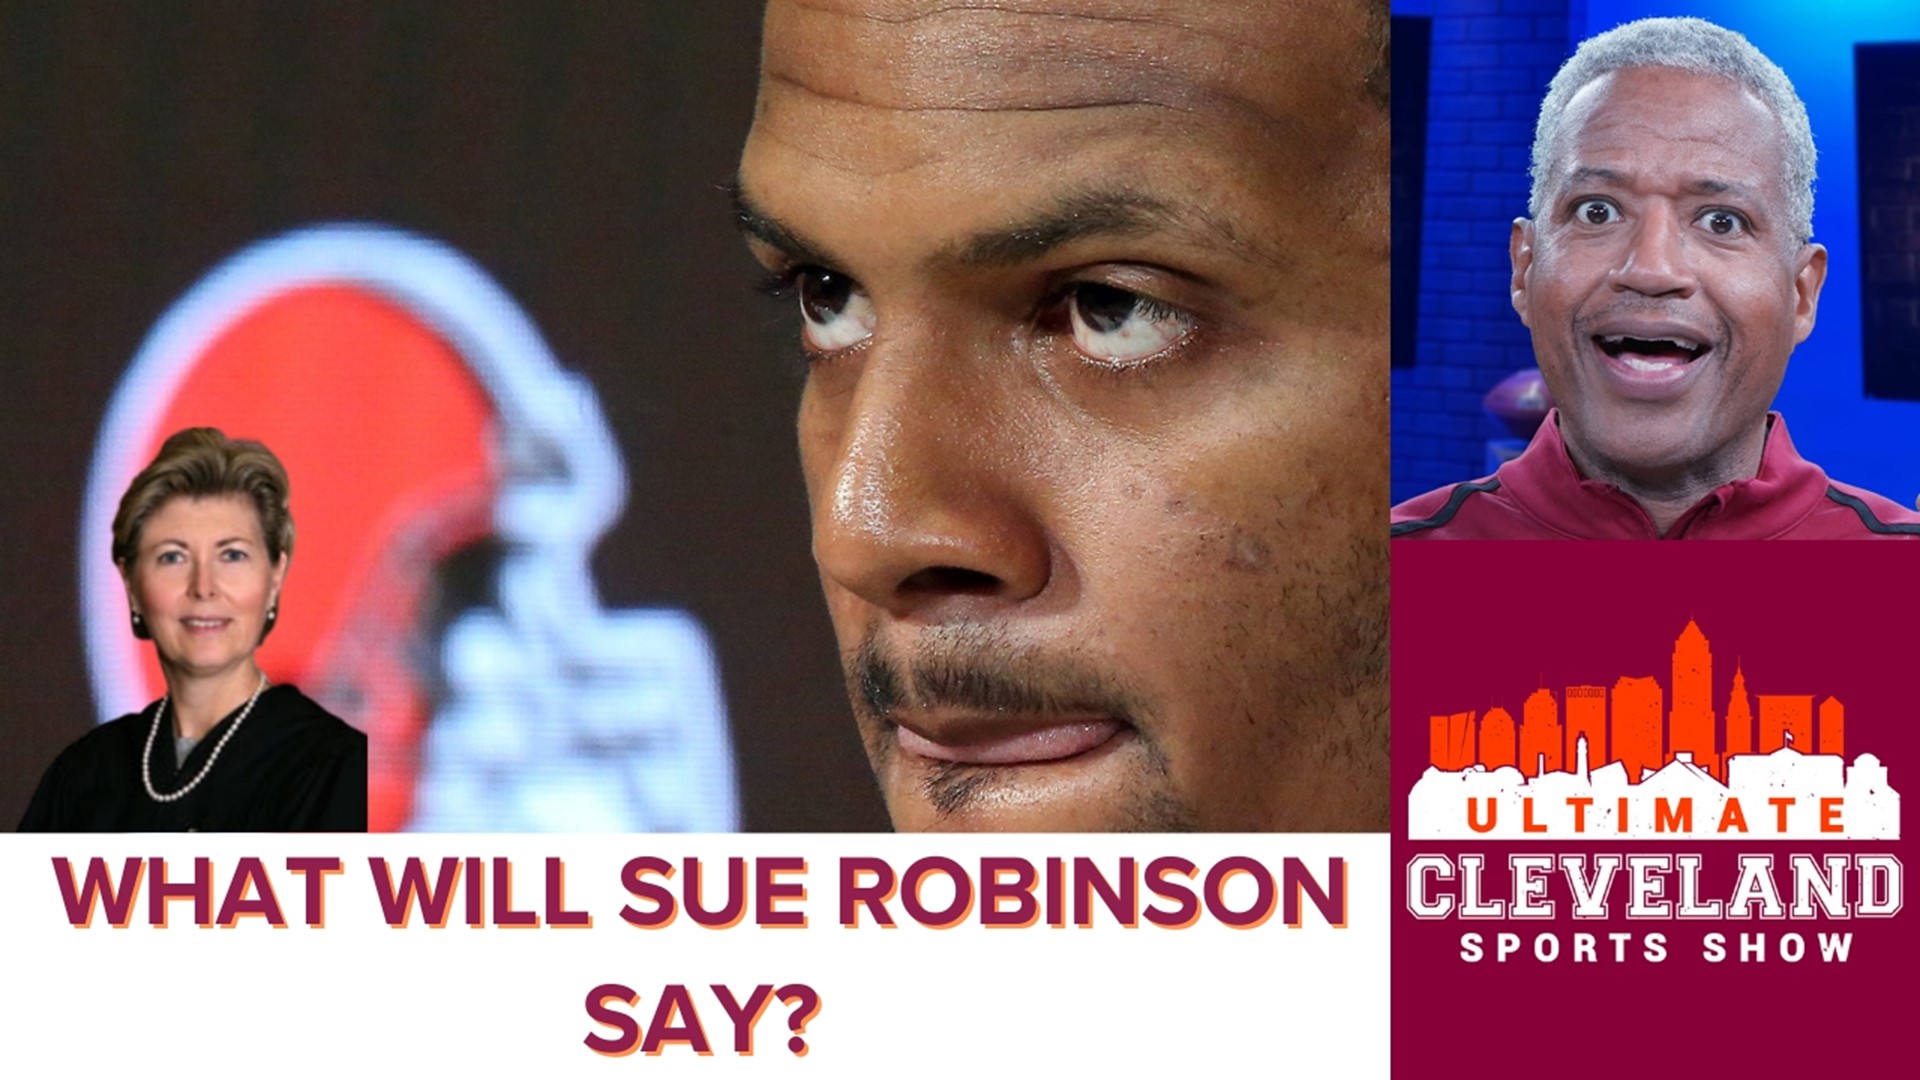 The UCSS crew reacts and breaks down the Deshaun Watson hearing and the strategy Sue Robinson may use against the NFL.